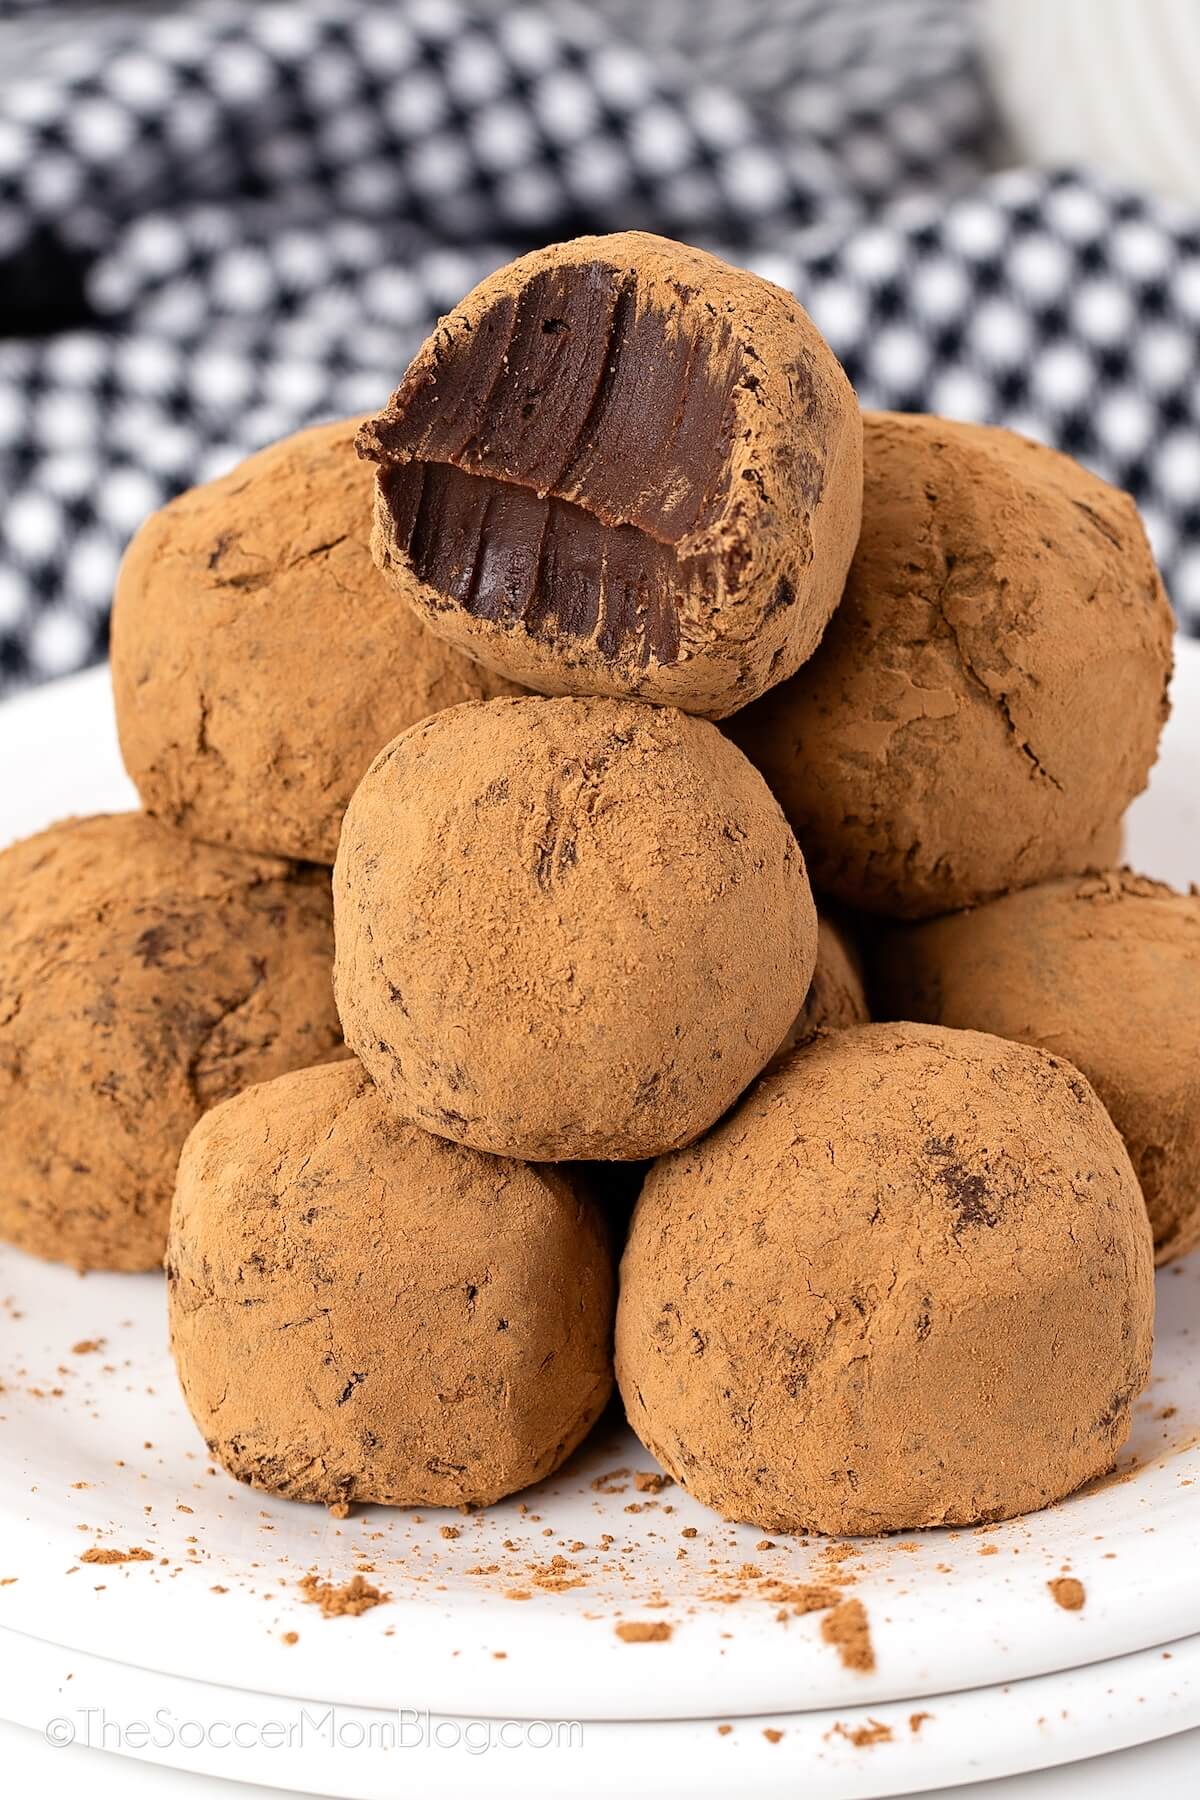 homemade chocolate truffles piled on a plate, one with a bite taken.